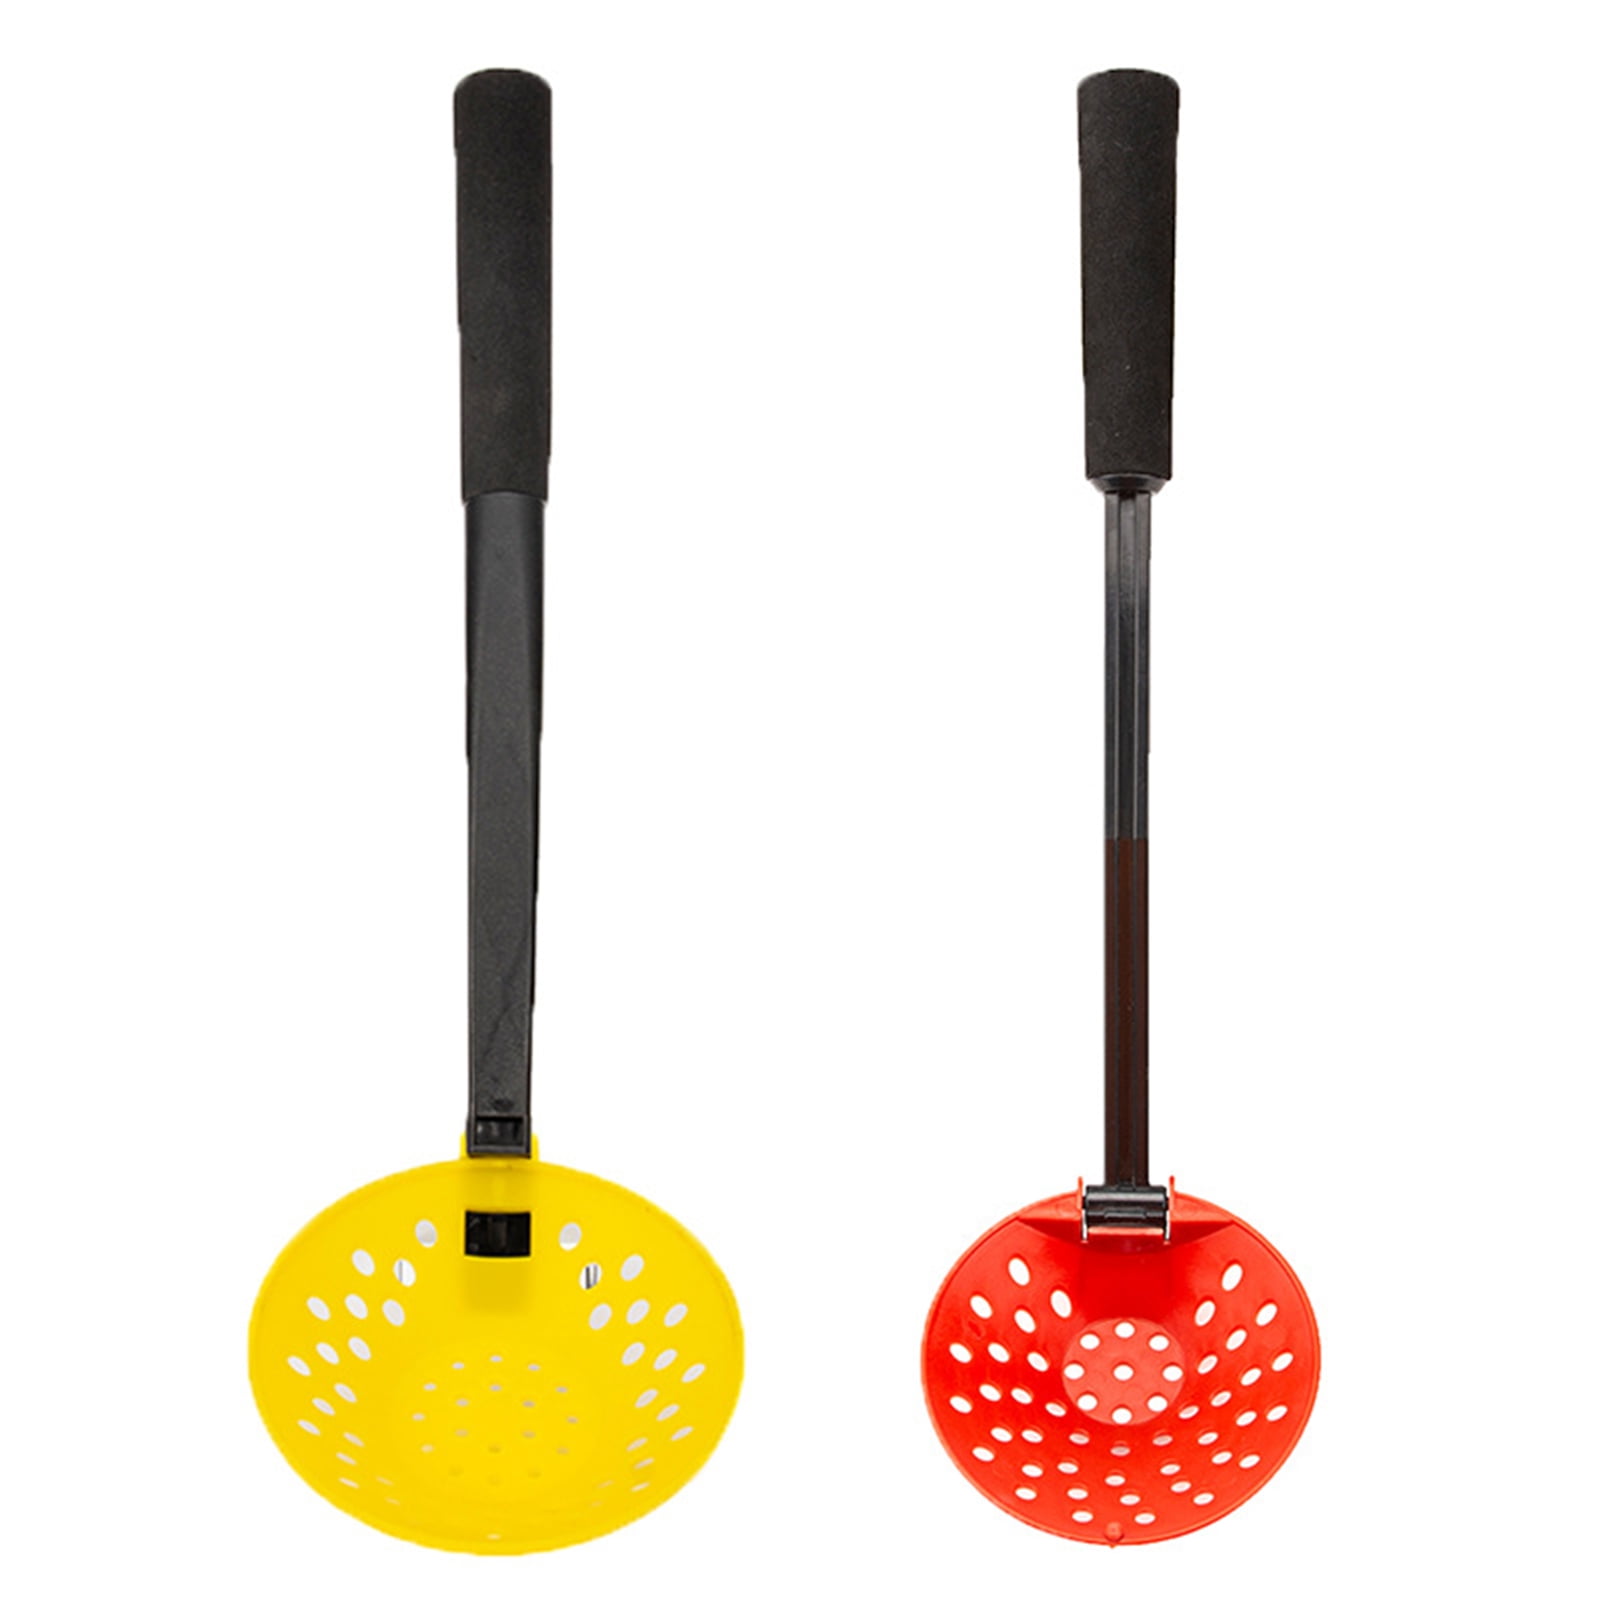 BESPORTBLE 2pcs ice Fishing Spoon Daily use Fishing Equipment Retractable  ice Picks ice Fishing Hole Skimmer